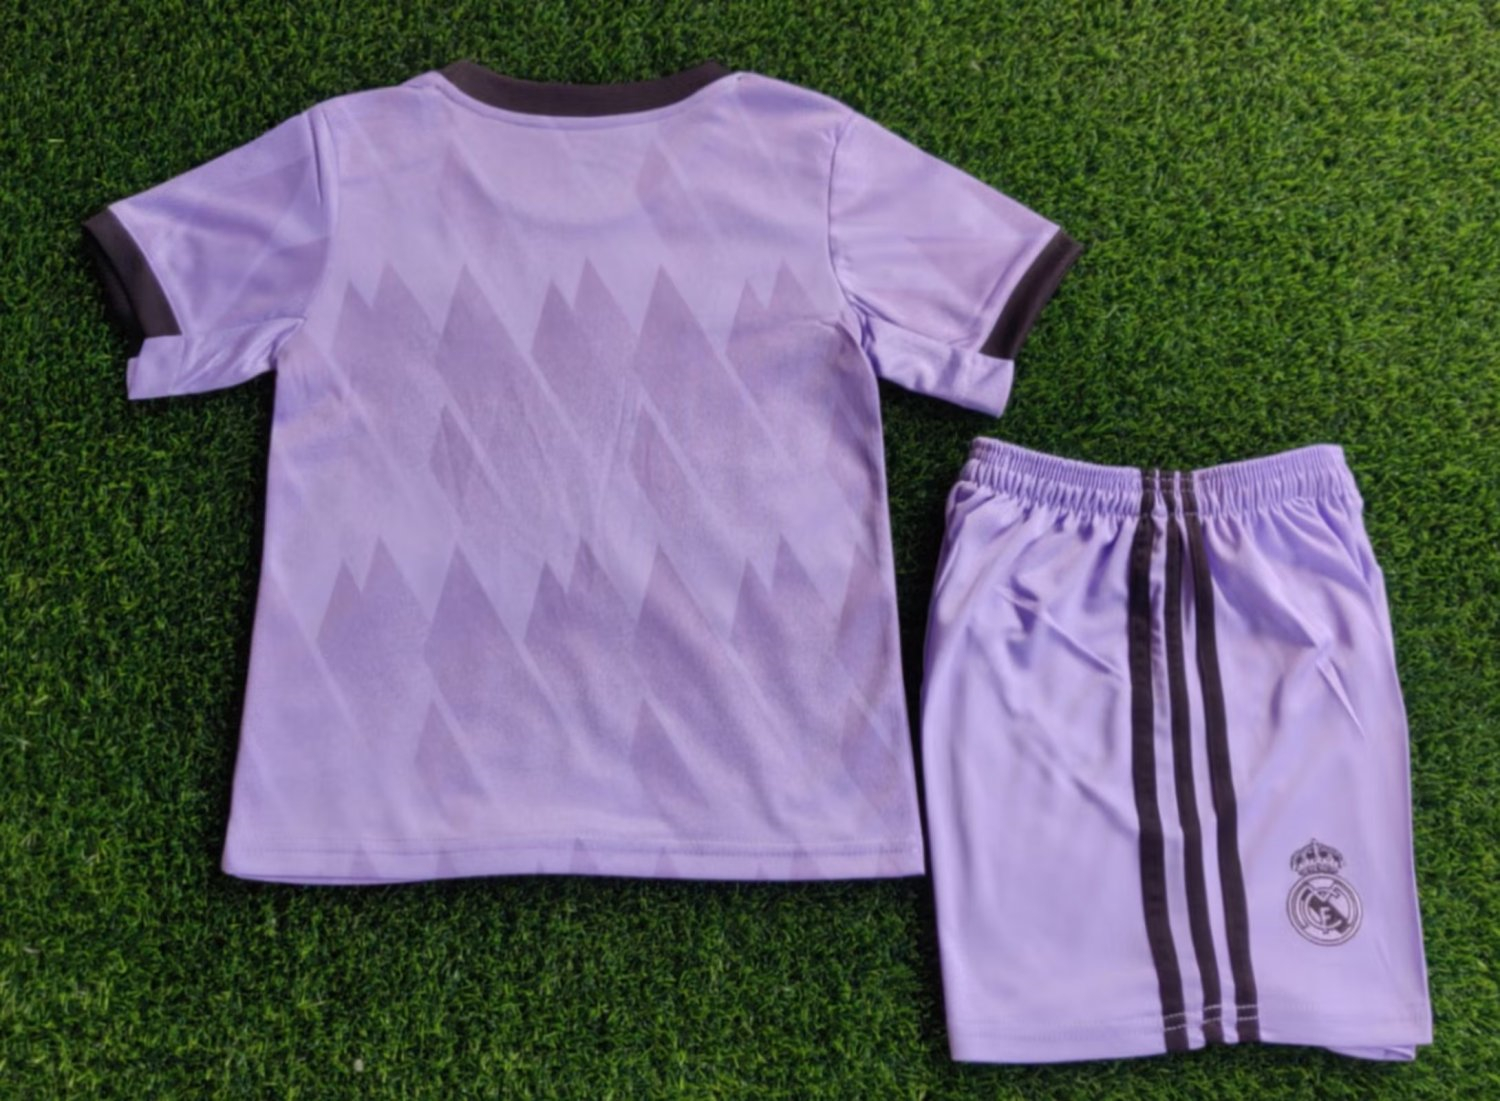 Real Madrid Soccer Jersey + Short Replica Away Youth 2022/23